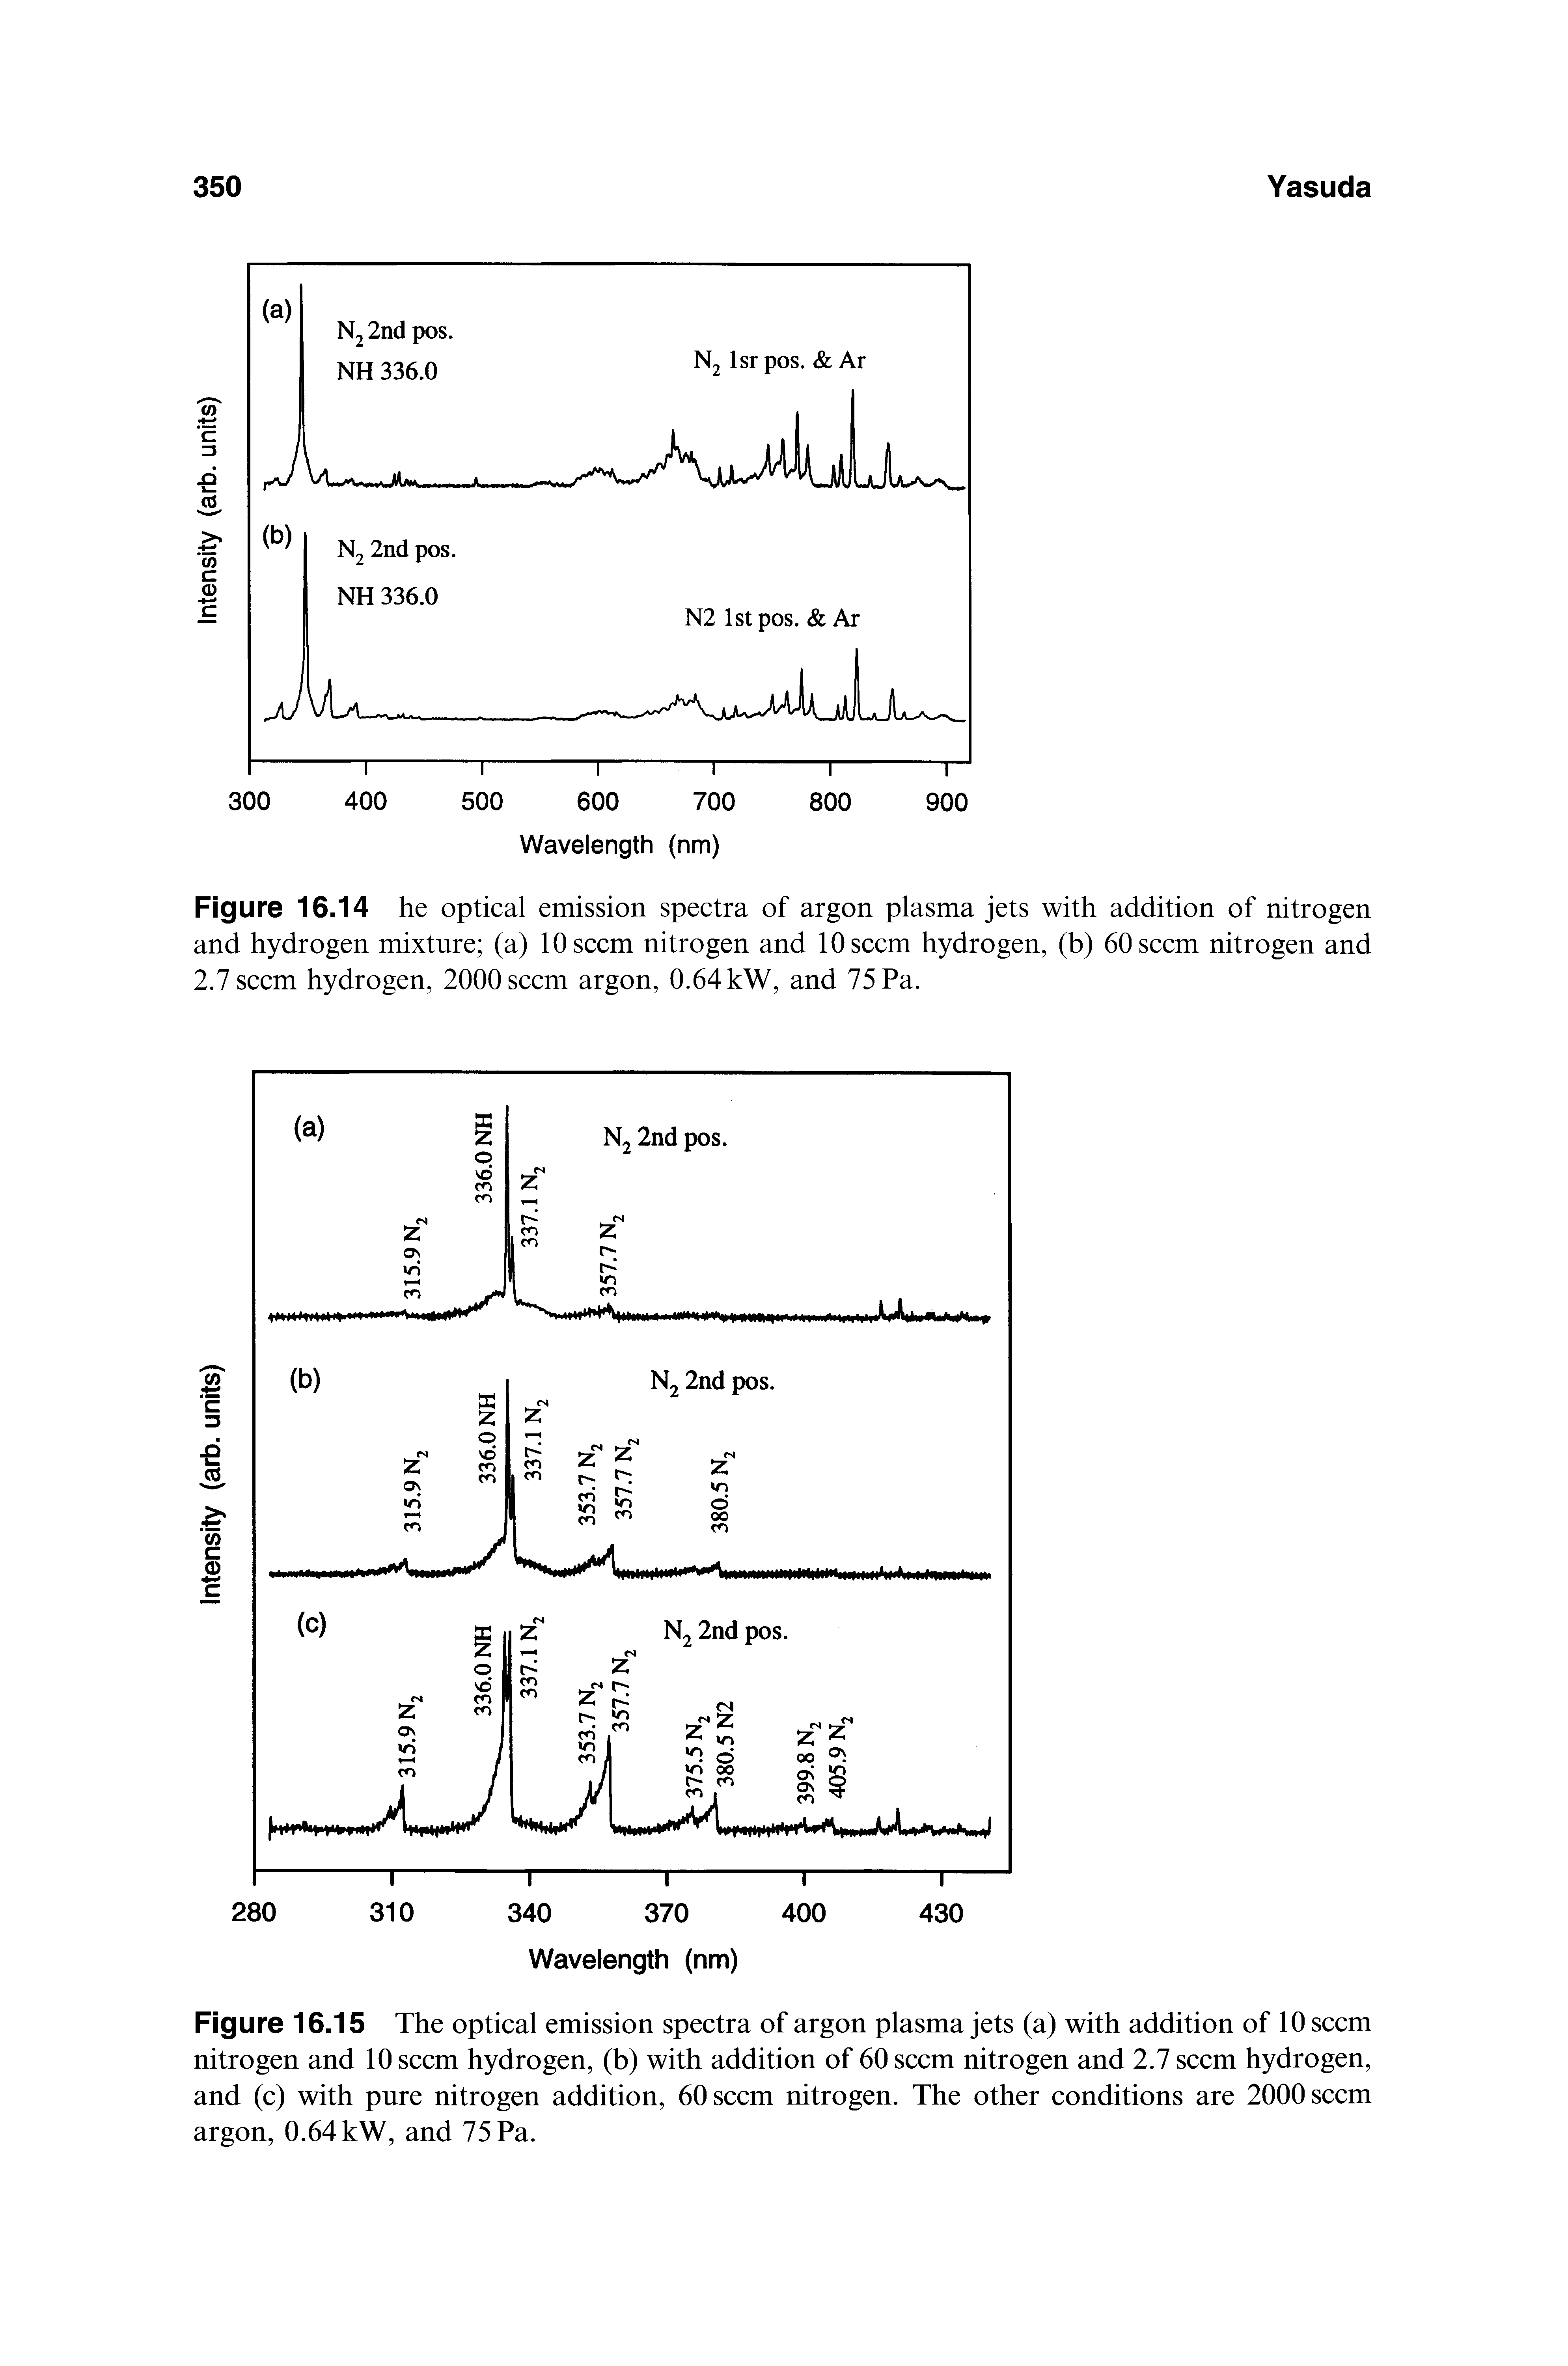 Figure 16.15 The optical emission spectra of argon plasma jets (a) with addition of 10 seem nitrogen and 10 seem hydrogen, (b) with addition of 60 seem nitrogen and 2.7 seem hydrogen, and (c) with pure nitrogen addition, 60 seem nitrogen. The other conditions are 2000 seem argon, 0.64 kW, and 75 Pa.